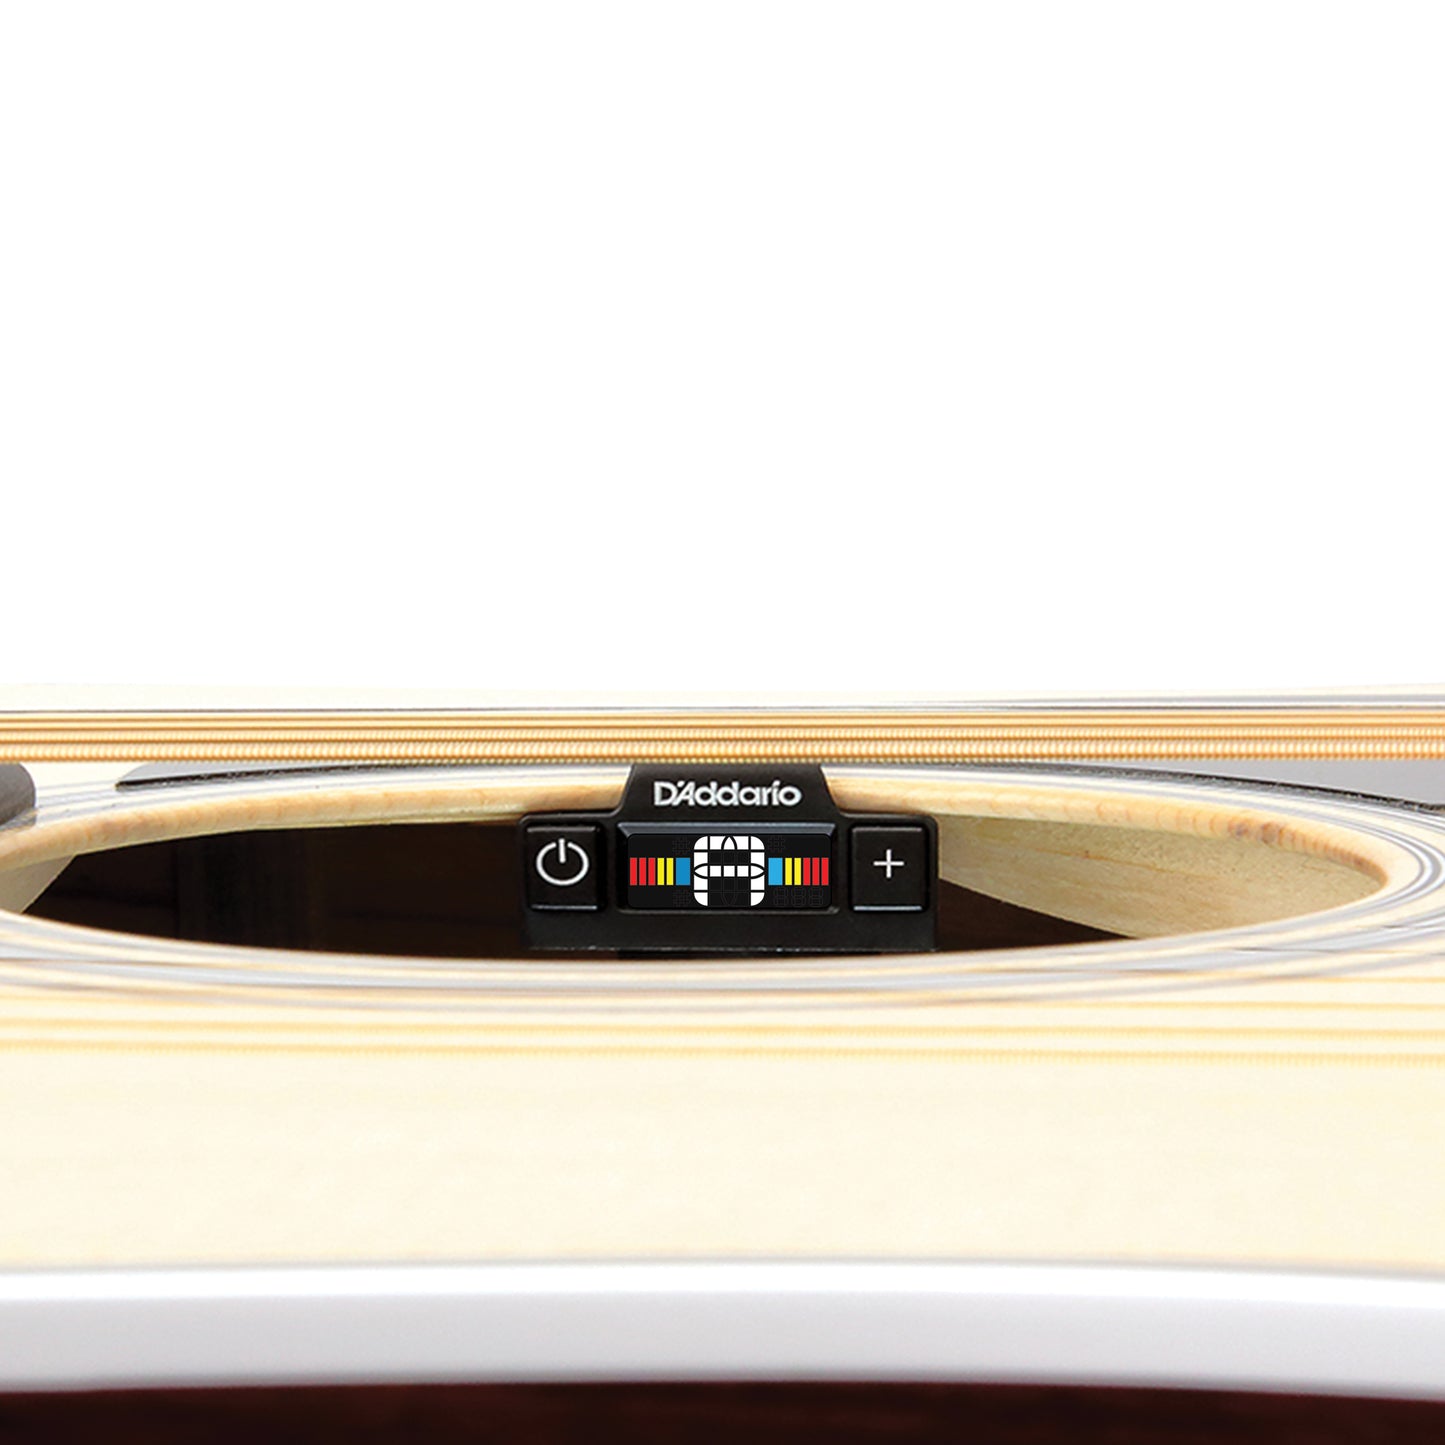 D'Addario Micro Soundhole Tuner installed on Sound hole 